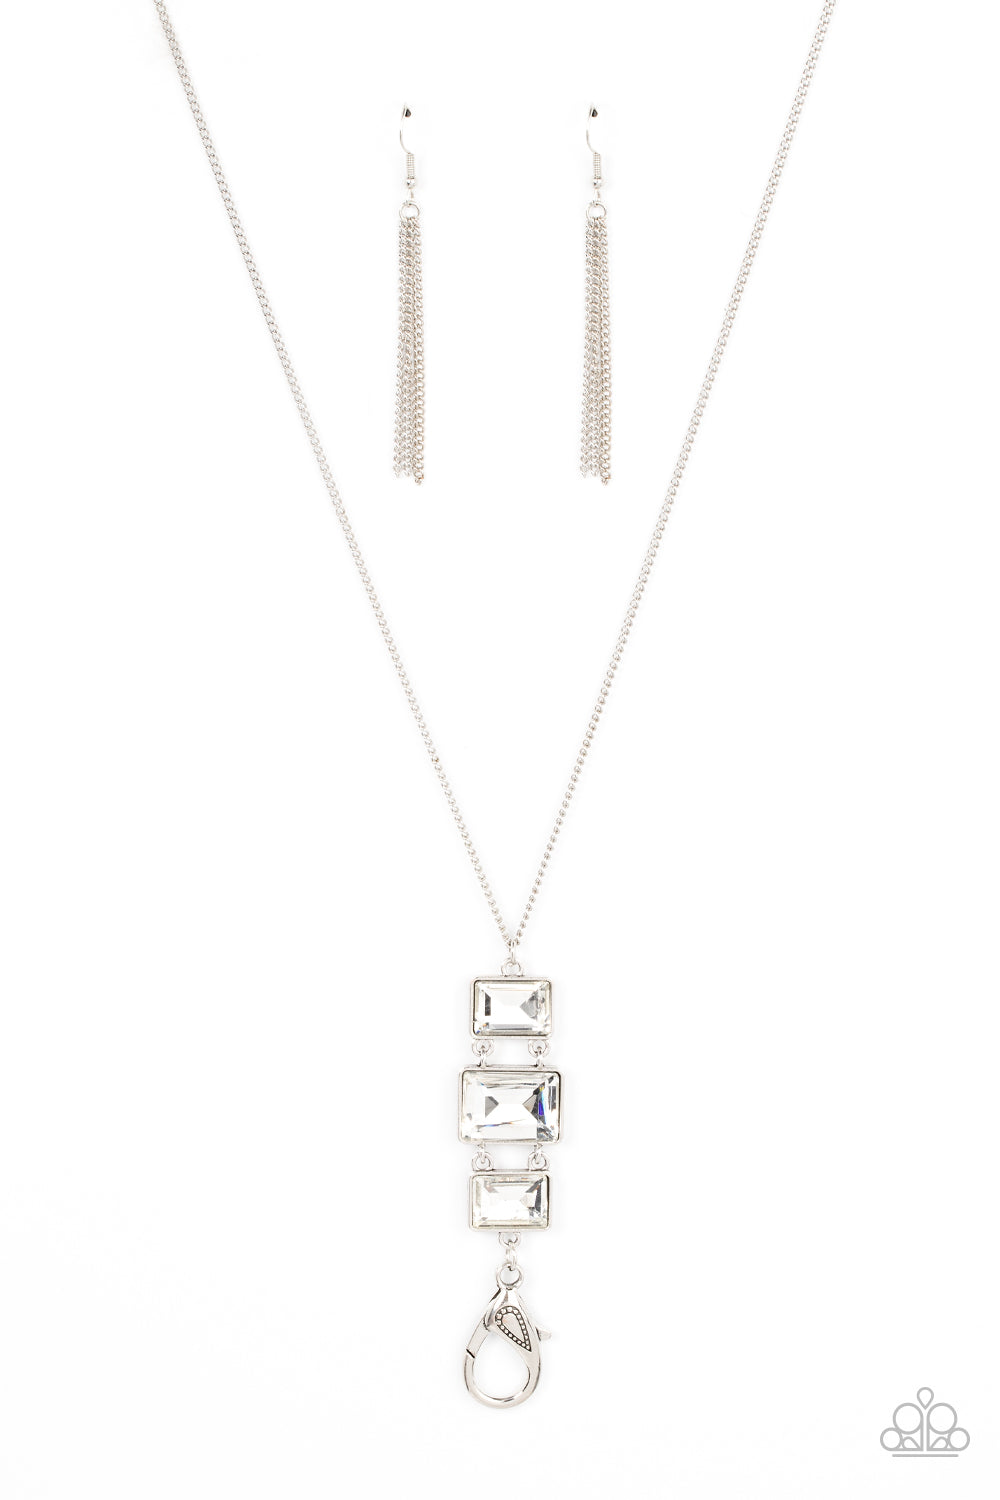 Uptown Totem Paparazzi Accessories Necklace with Earrings White